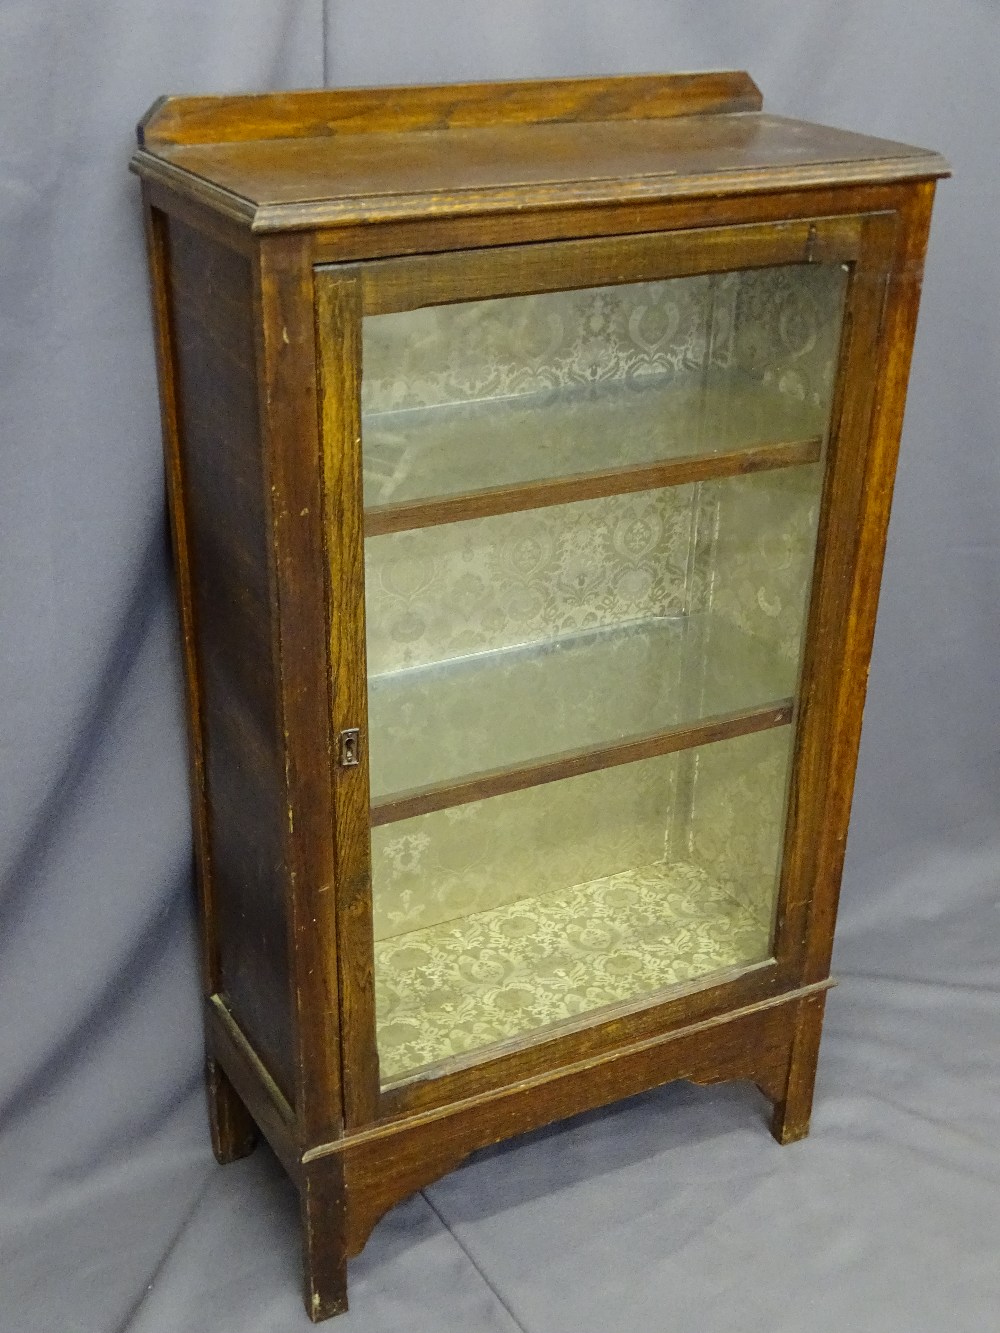 SINGLE GLAZED DOOR OAK DISPLAY CABINET and two bentwood chairs, various measurements - Image 2 of 4